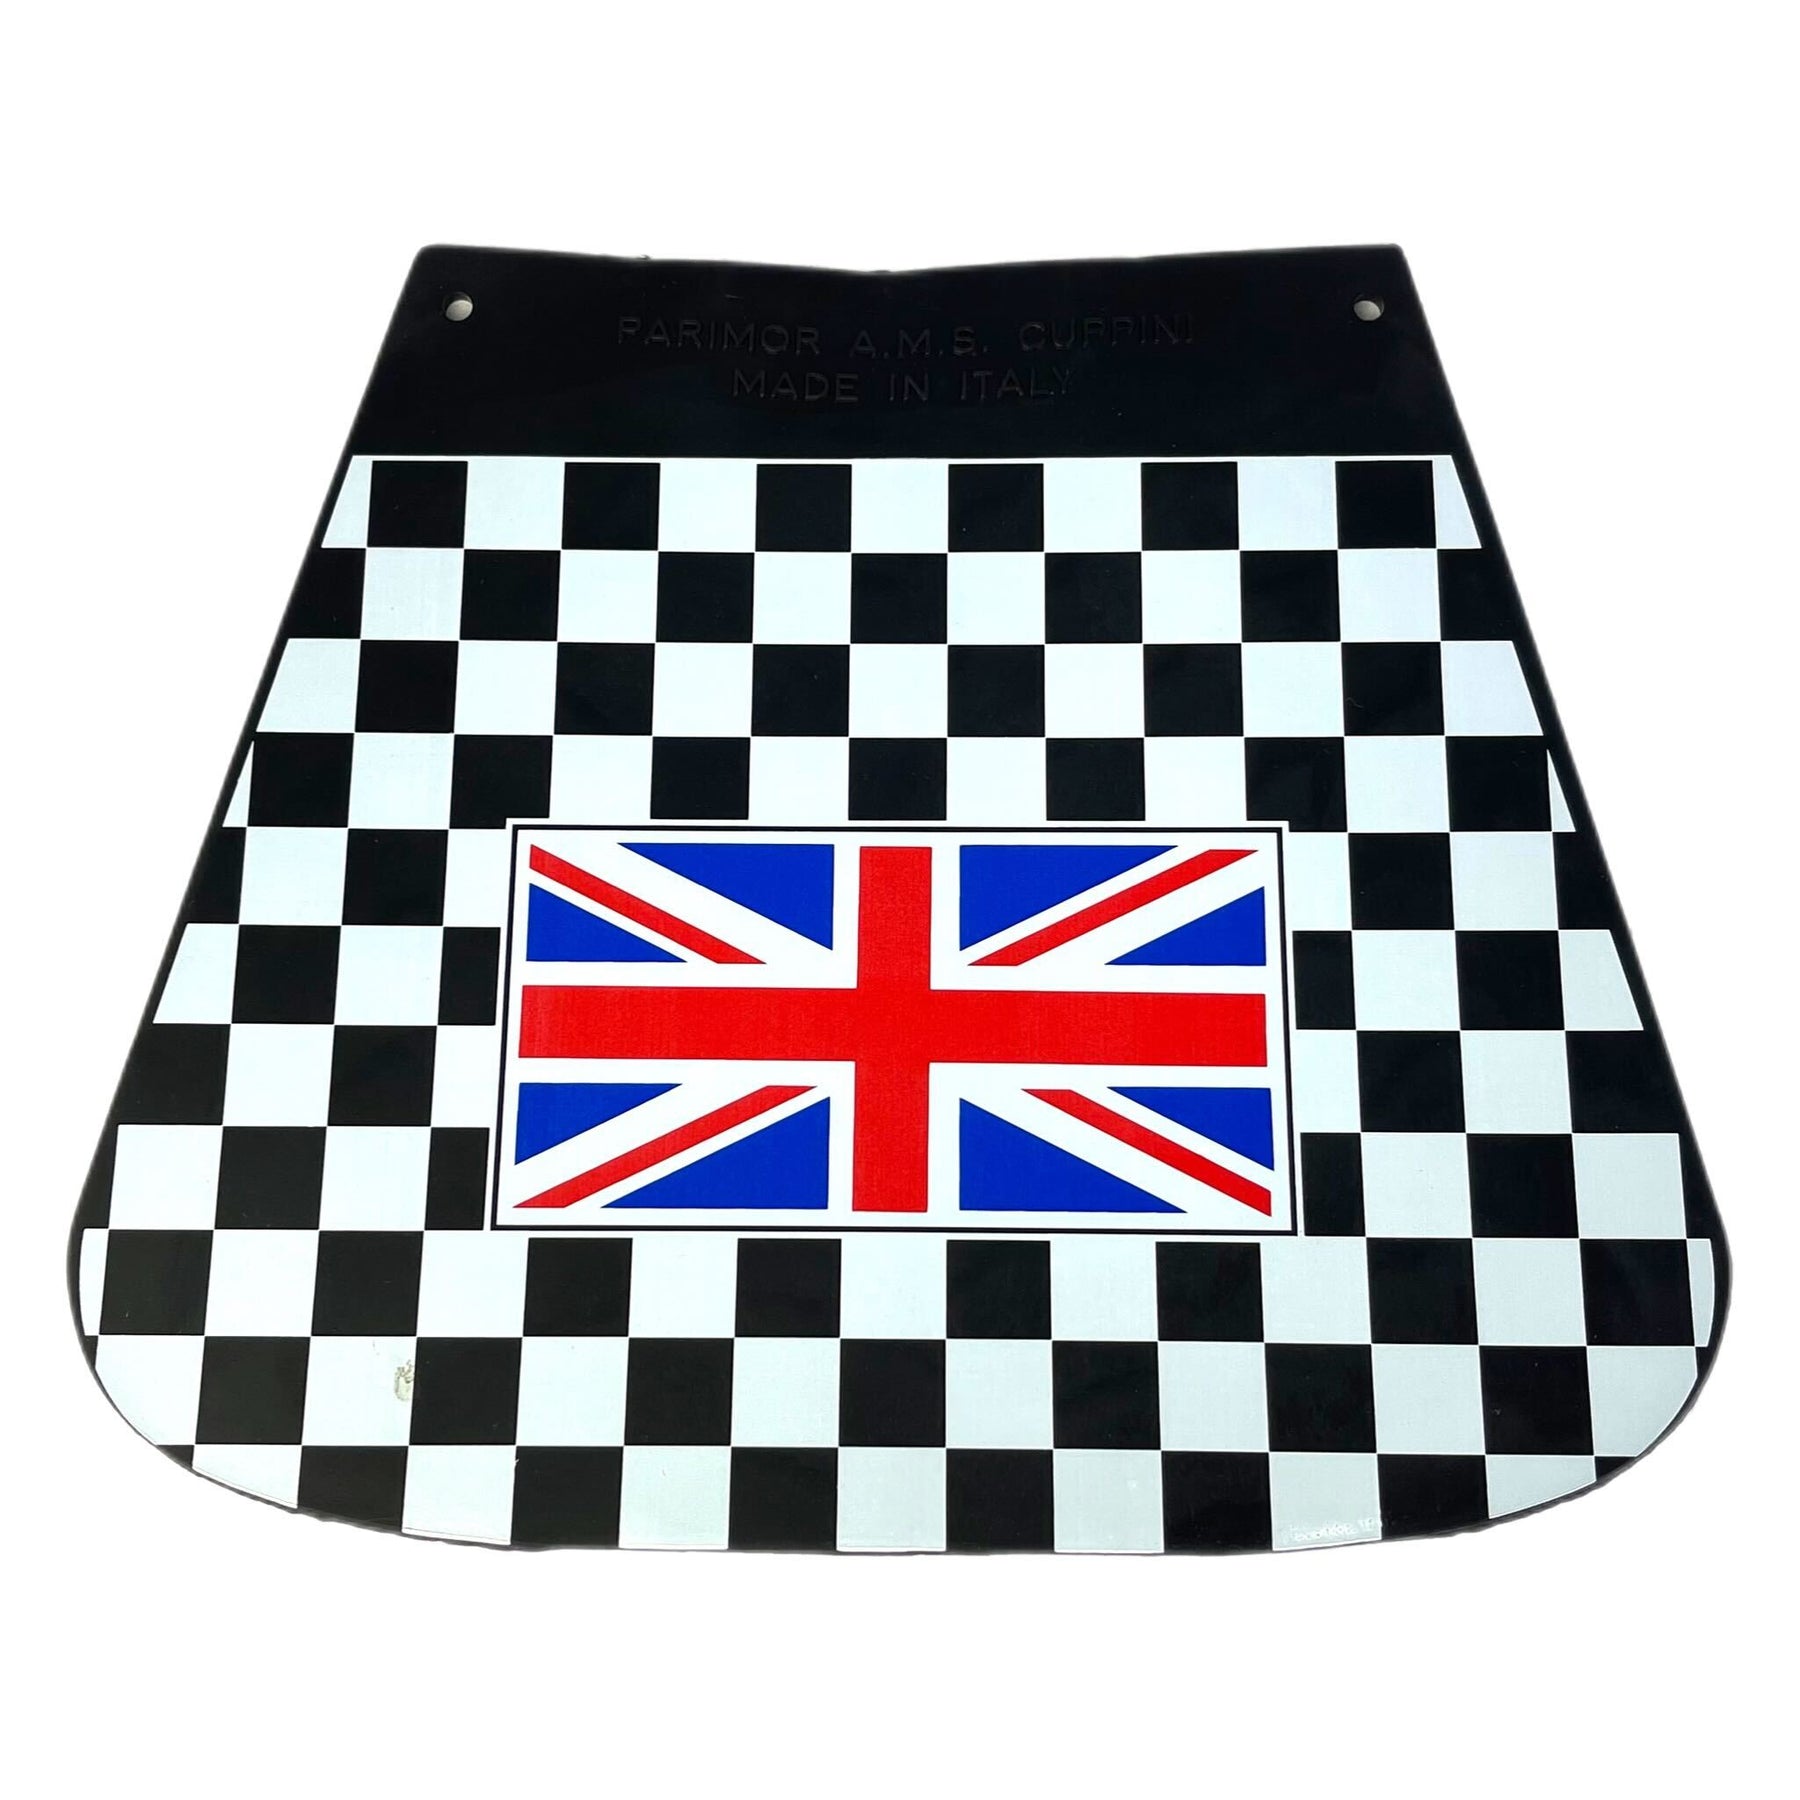 Vespa Lambretta Scooter Royal Alloy Scomadi Chequered Mudflap With Union Flag Flat Type